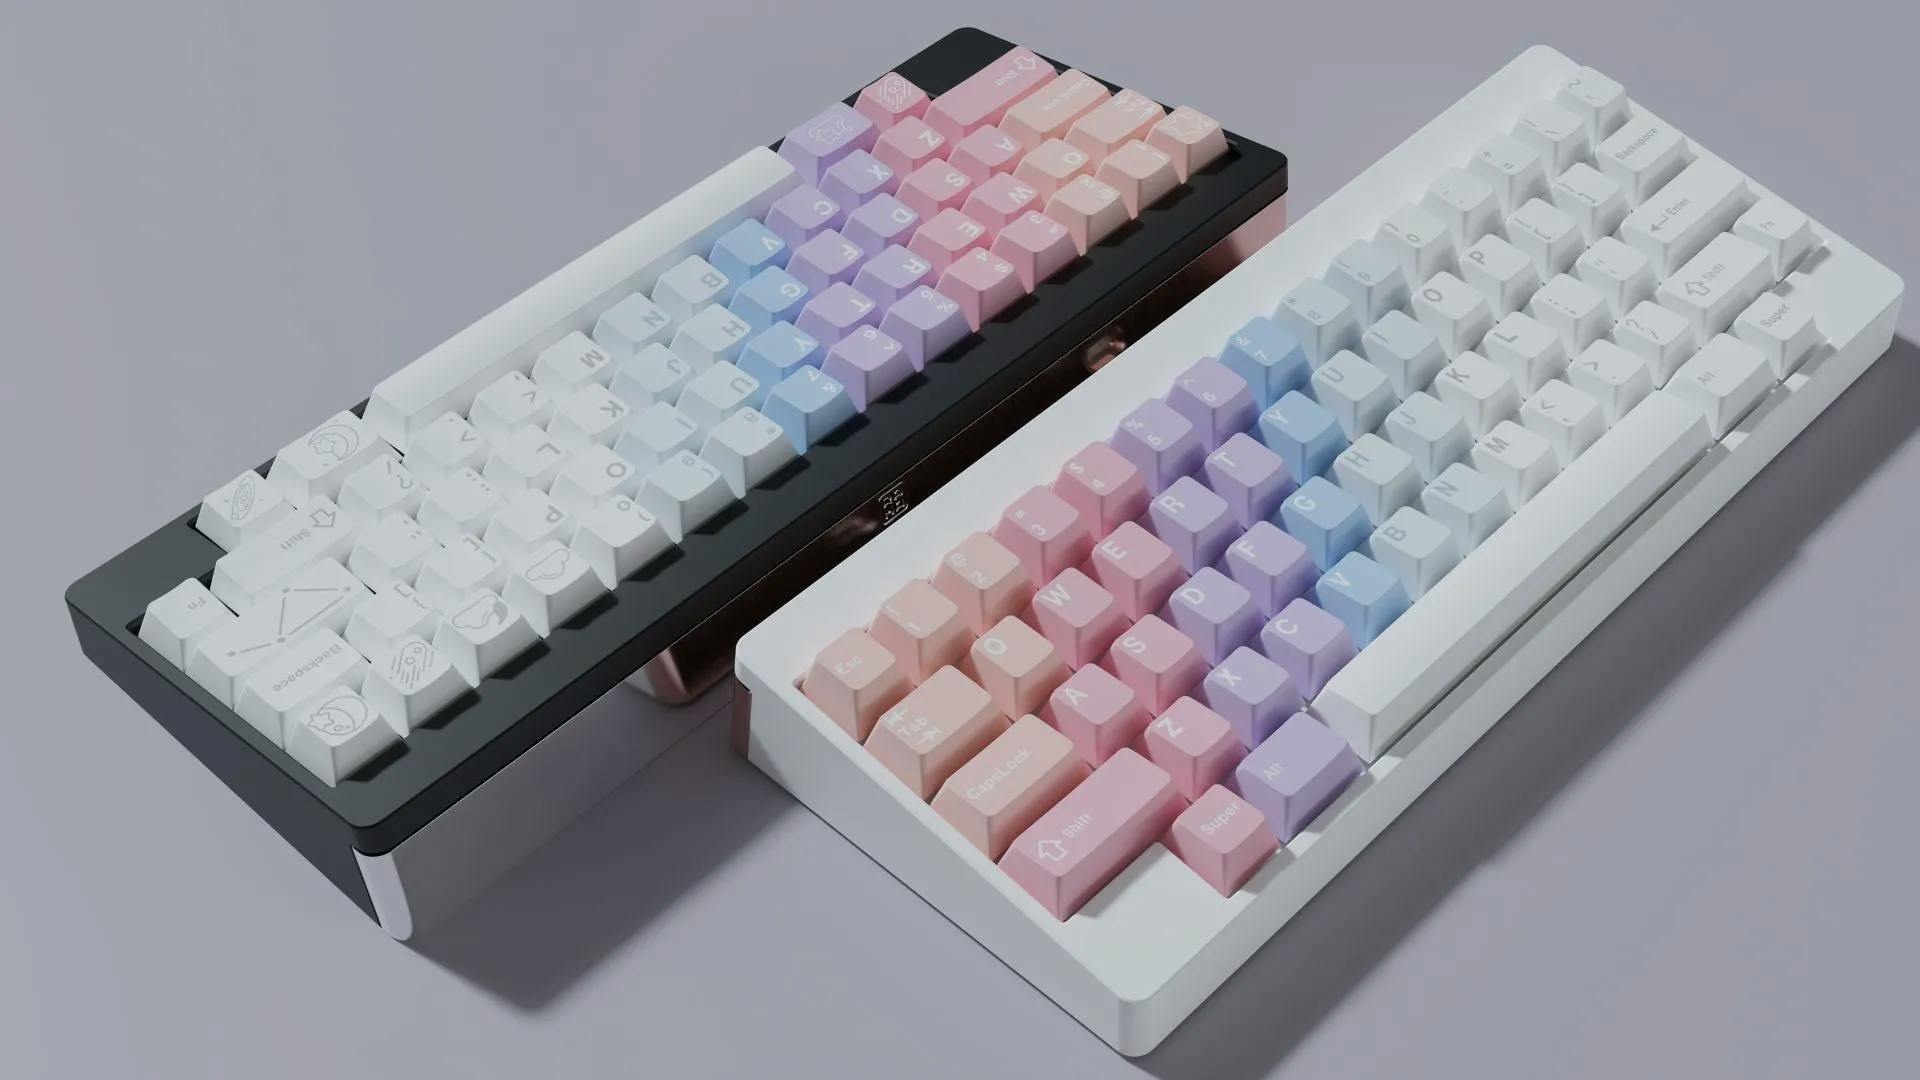 Image for (In Stock) ePBT Dreamscape Keycaps